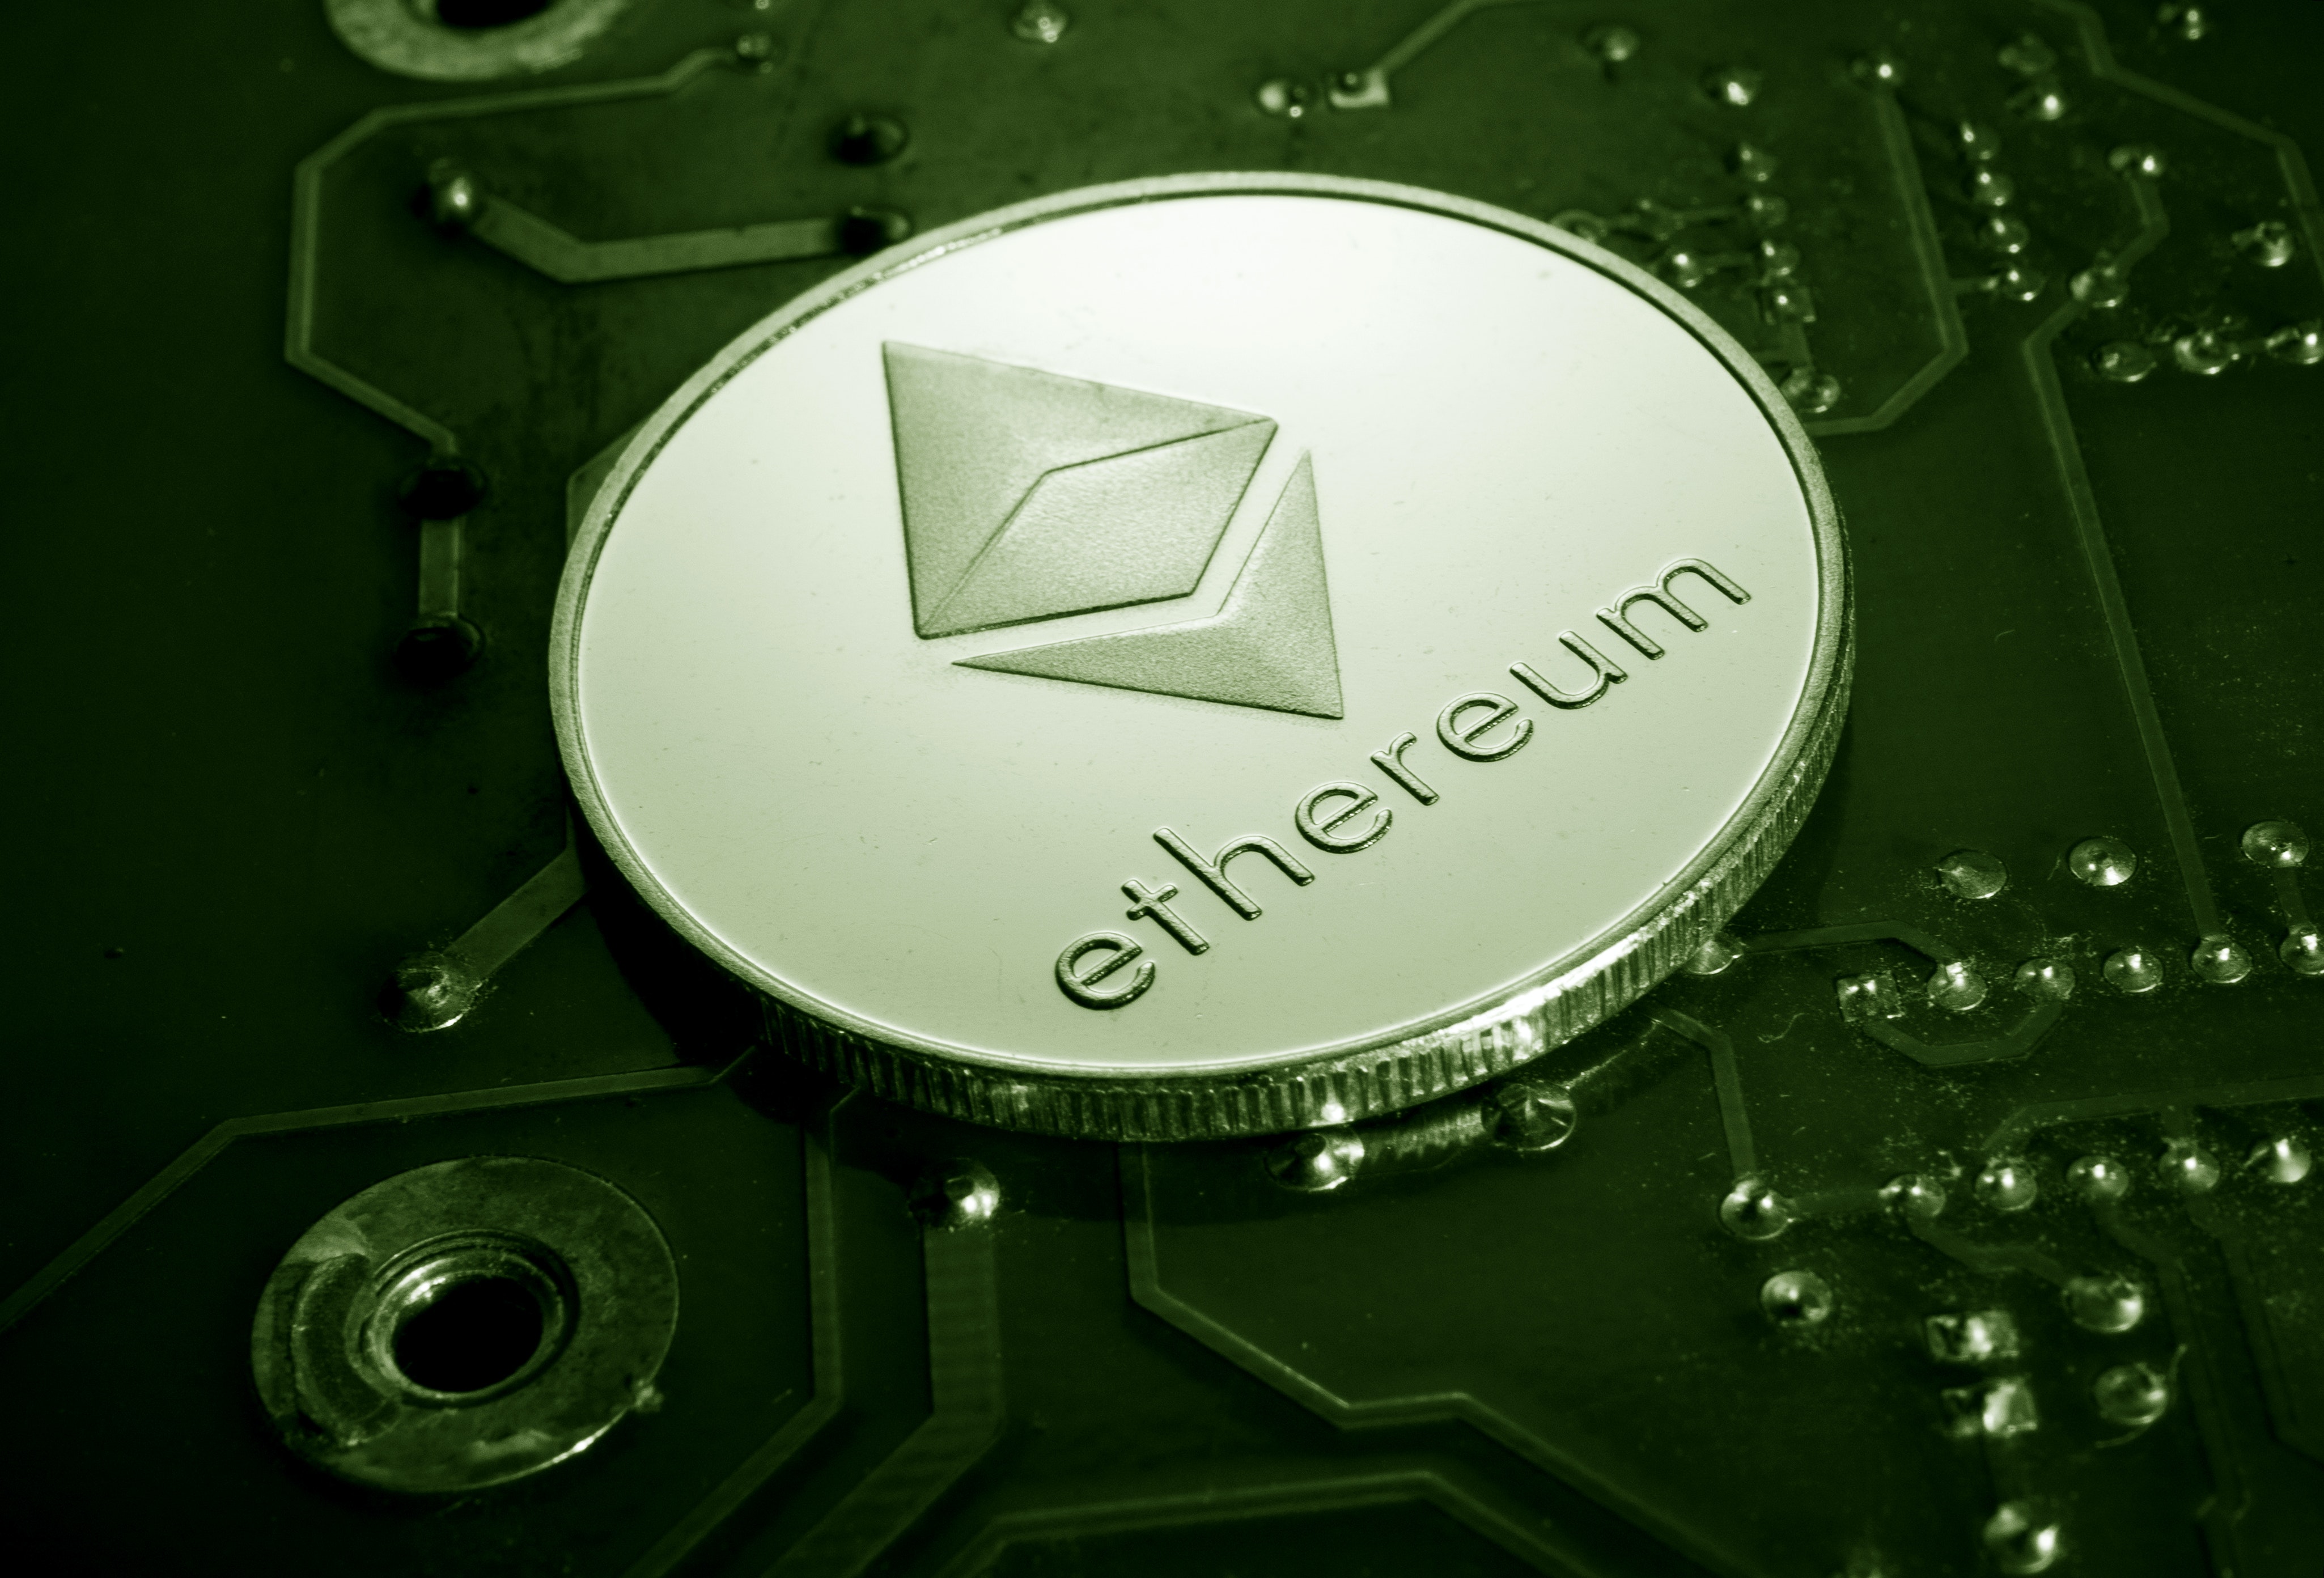 The Ethereum price is indicating a new rally as it sets its sights on reaching $2,000